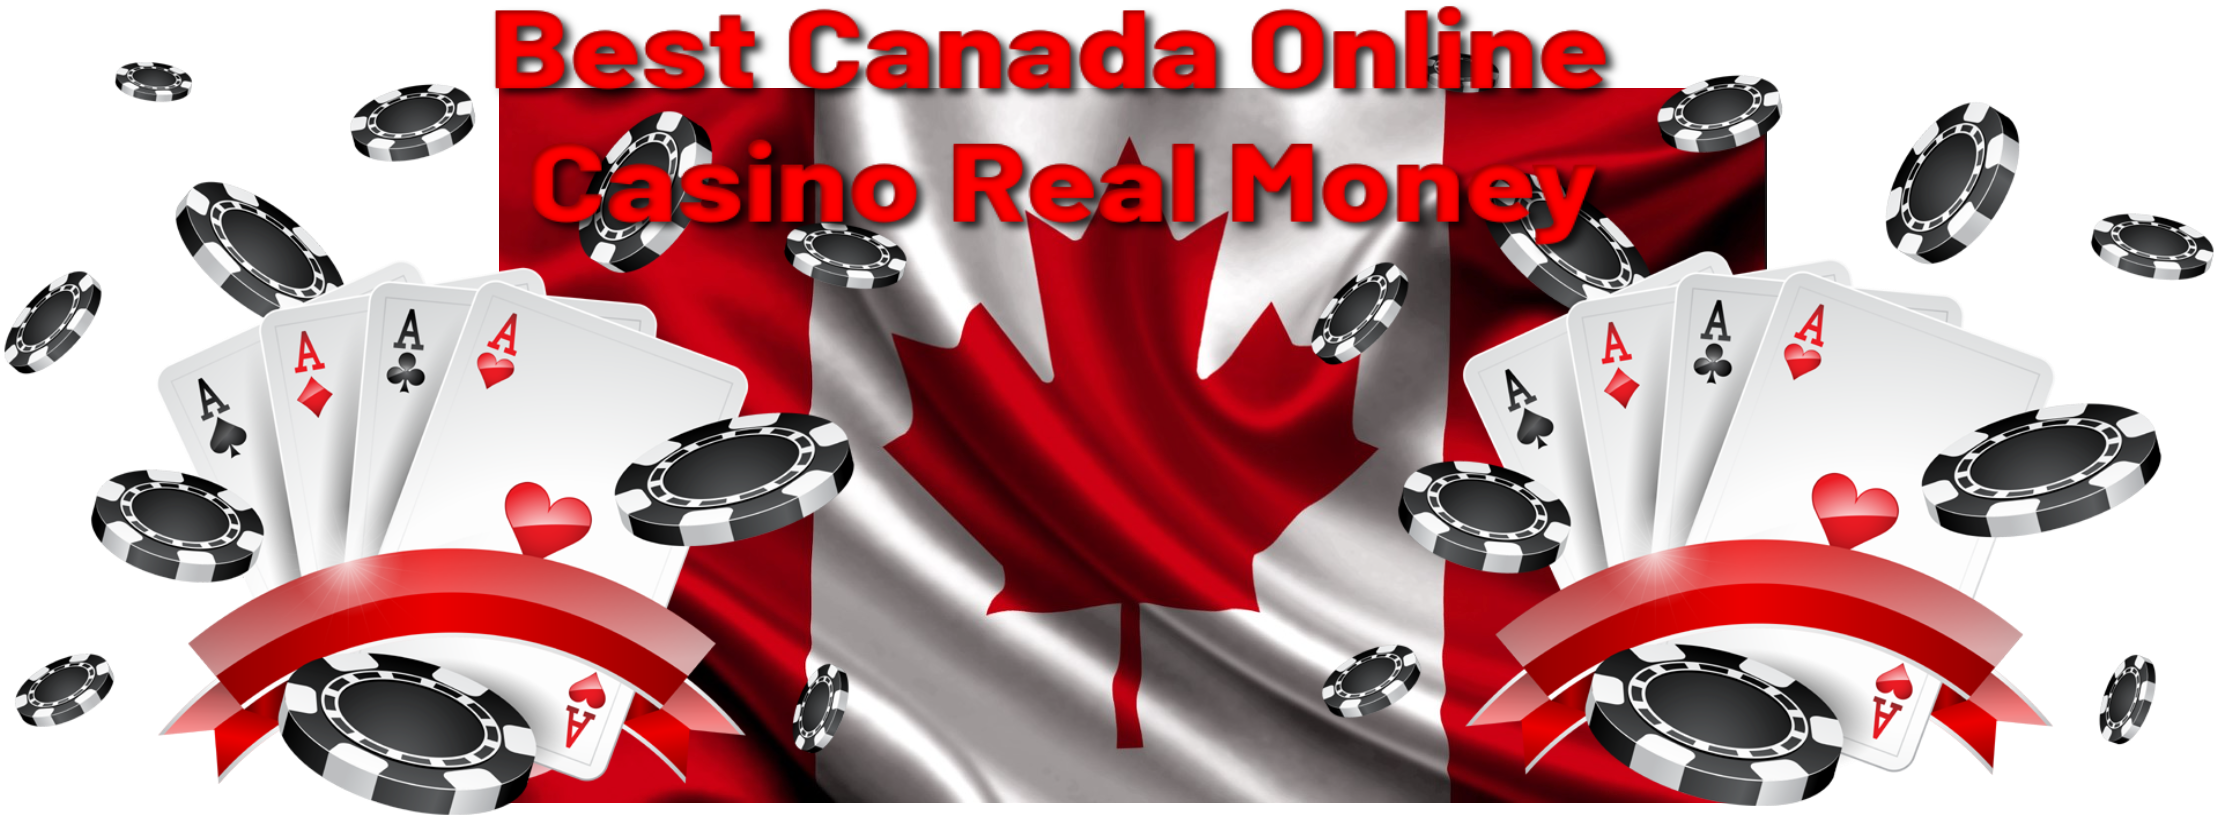 Mastering The Way Of 10 casinos Canada Is Not An Accident - It's An Art